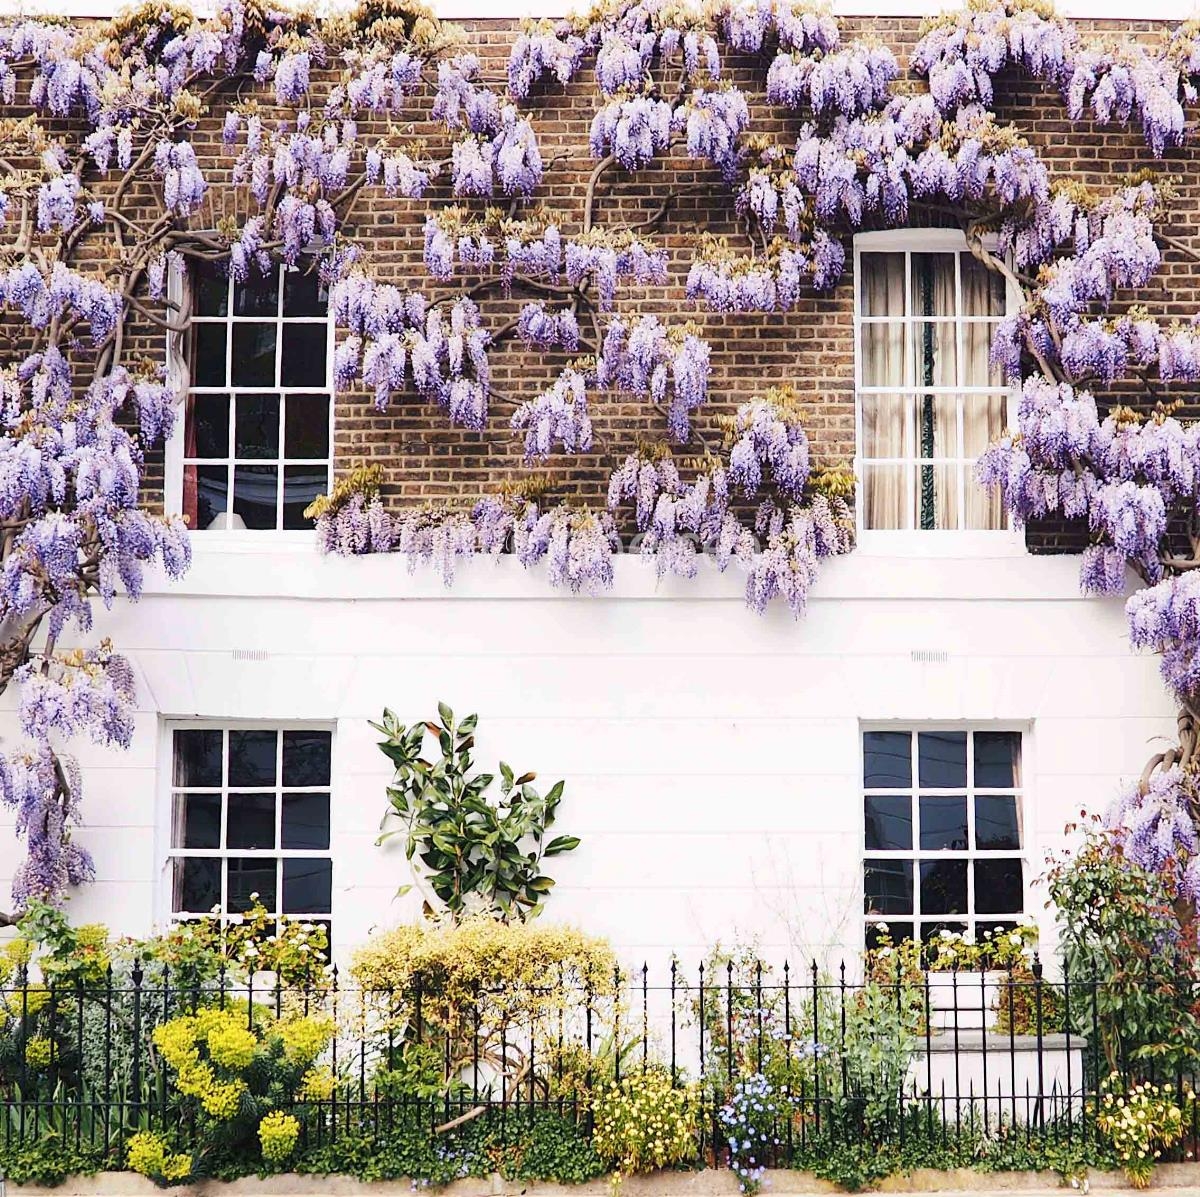 Where to Find Wisteria in London: My Top Locations in Chelsea - Liviatiana